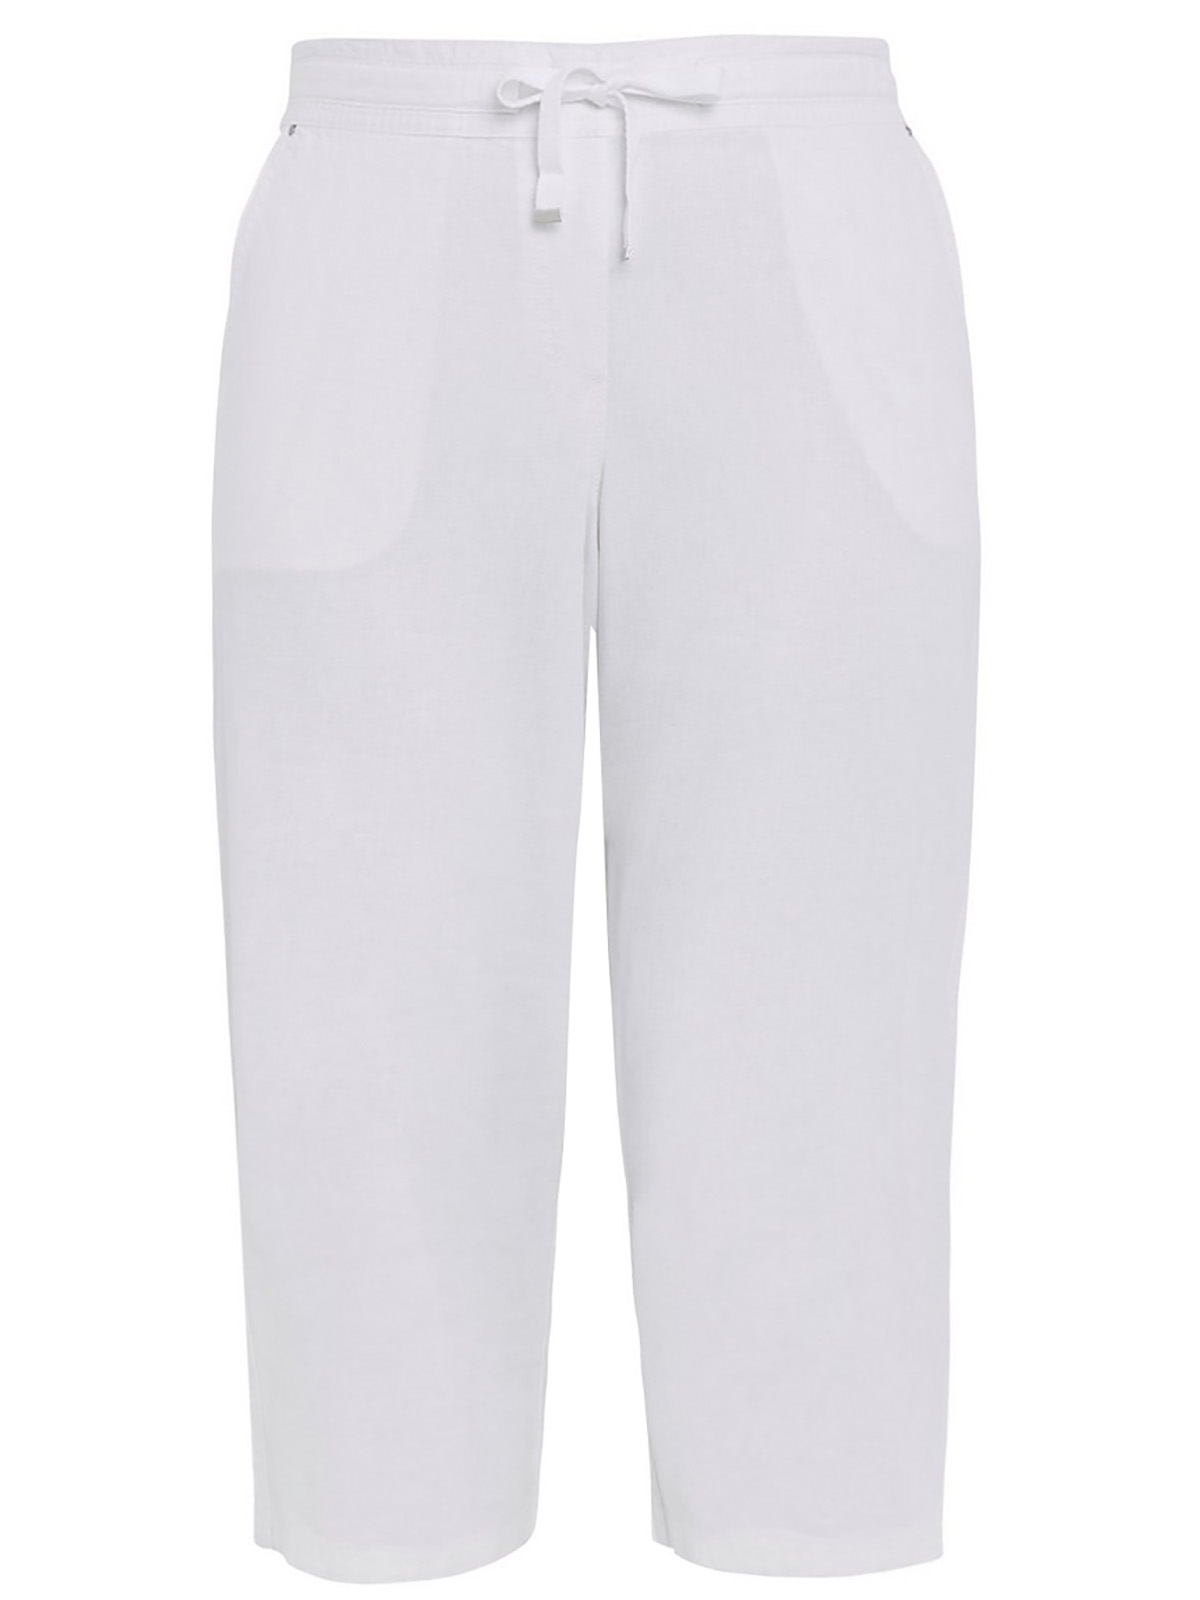 3VANS WHITE Linen Blend Pull On Cropped Trousers - Plus Size 14 to 28